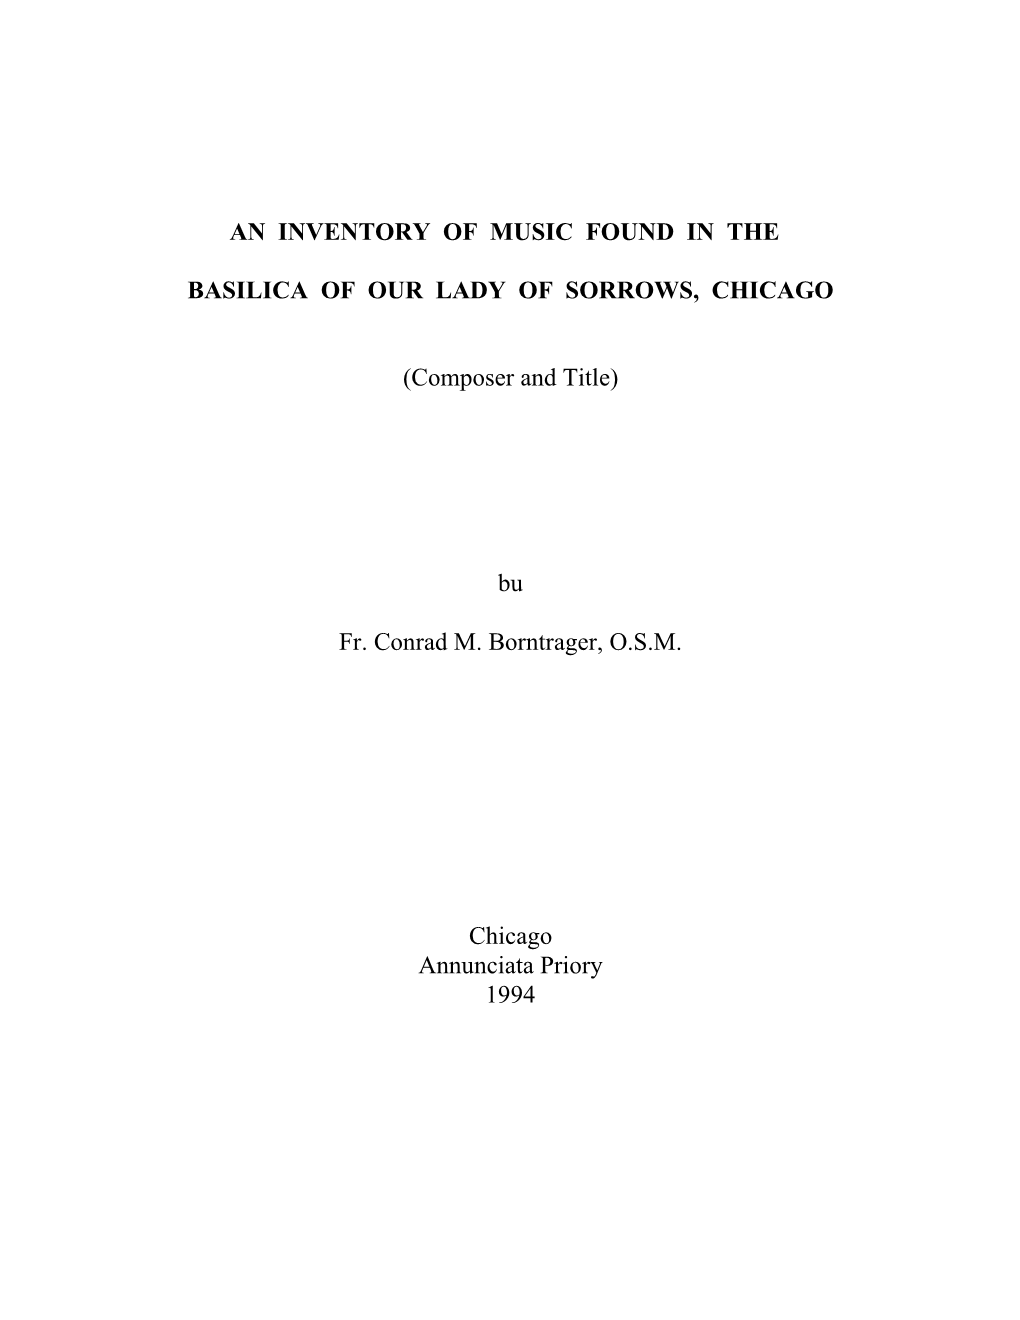 AN INVENTORY of MUSIC FOUND in the BASILICA of OUR LADY of SORROWS, CHICAGO (Composer and Title) Bu Fr. Conrad M. B